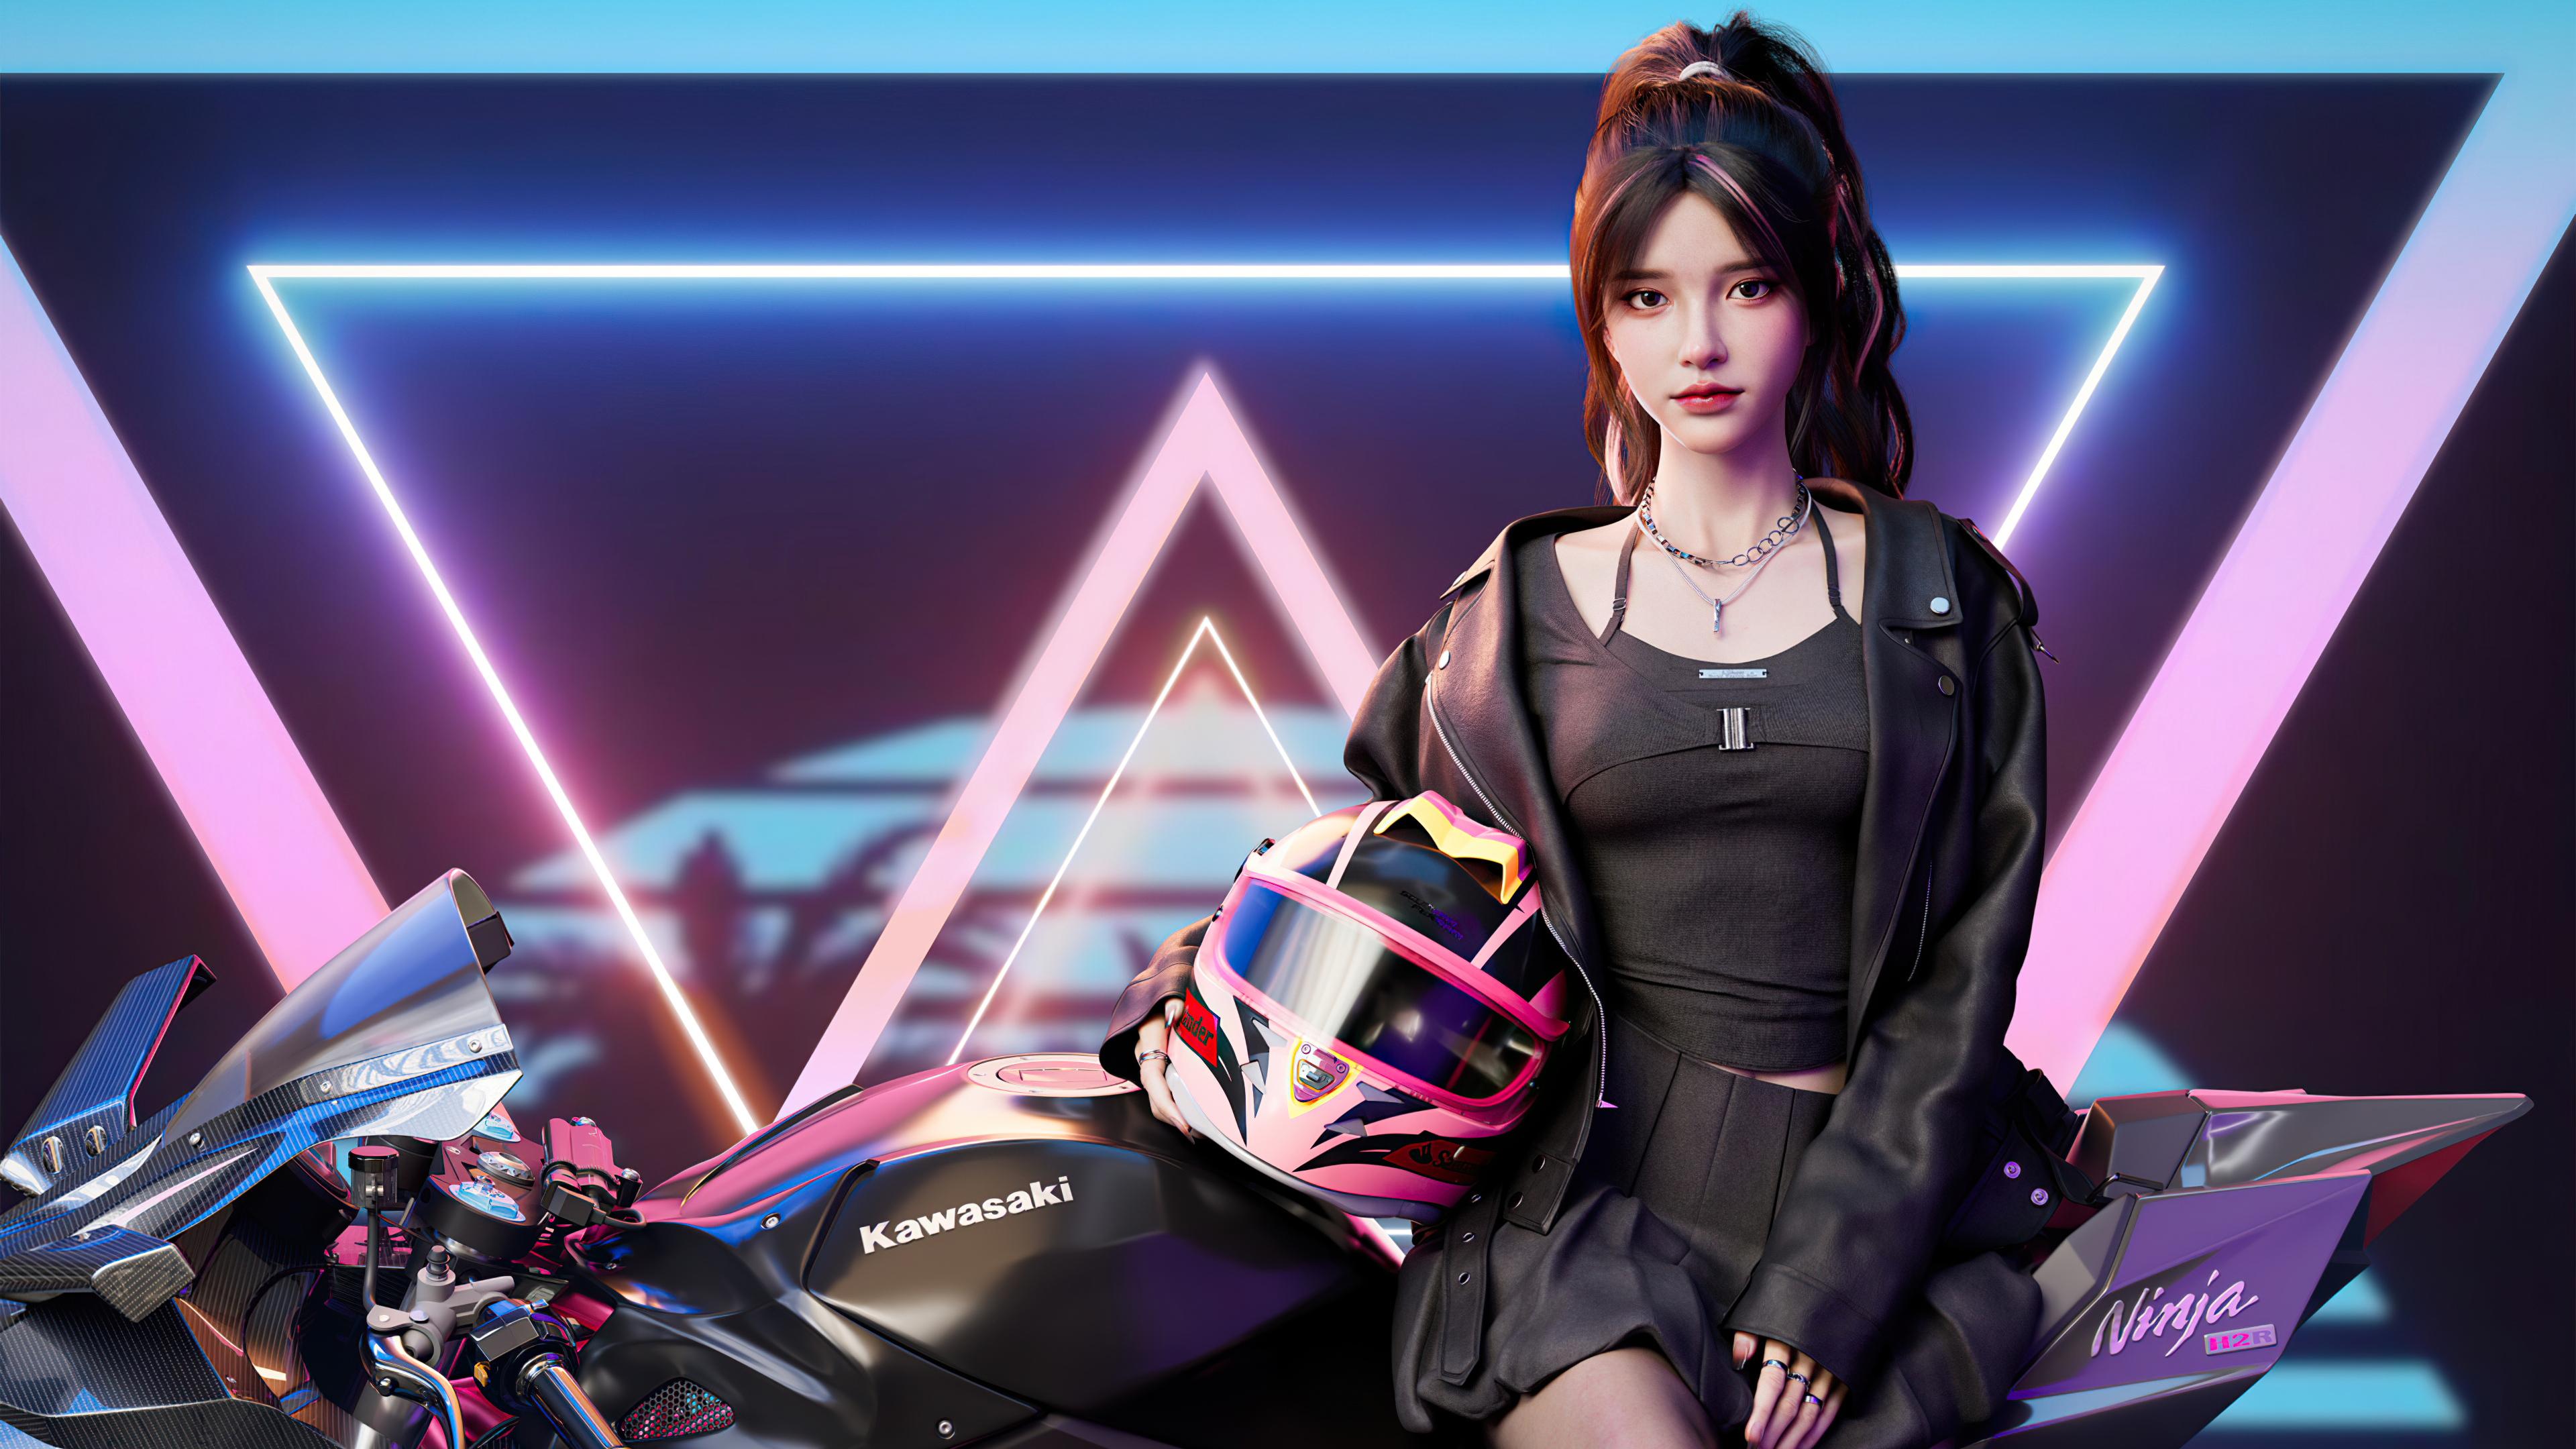 Cool Cgi Biker Girl With Ninja H2r, HD Artist, 4k Wallpapers, Images,  Backgrounds, Photos and Pictures